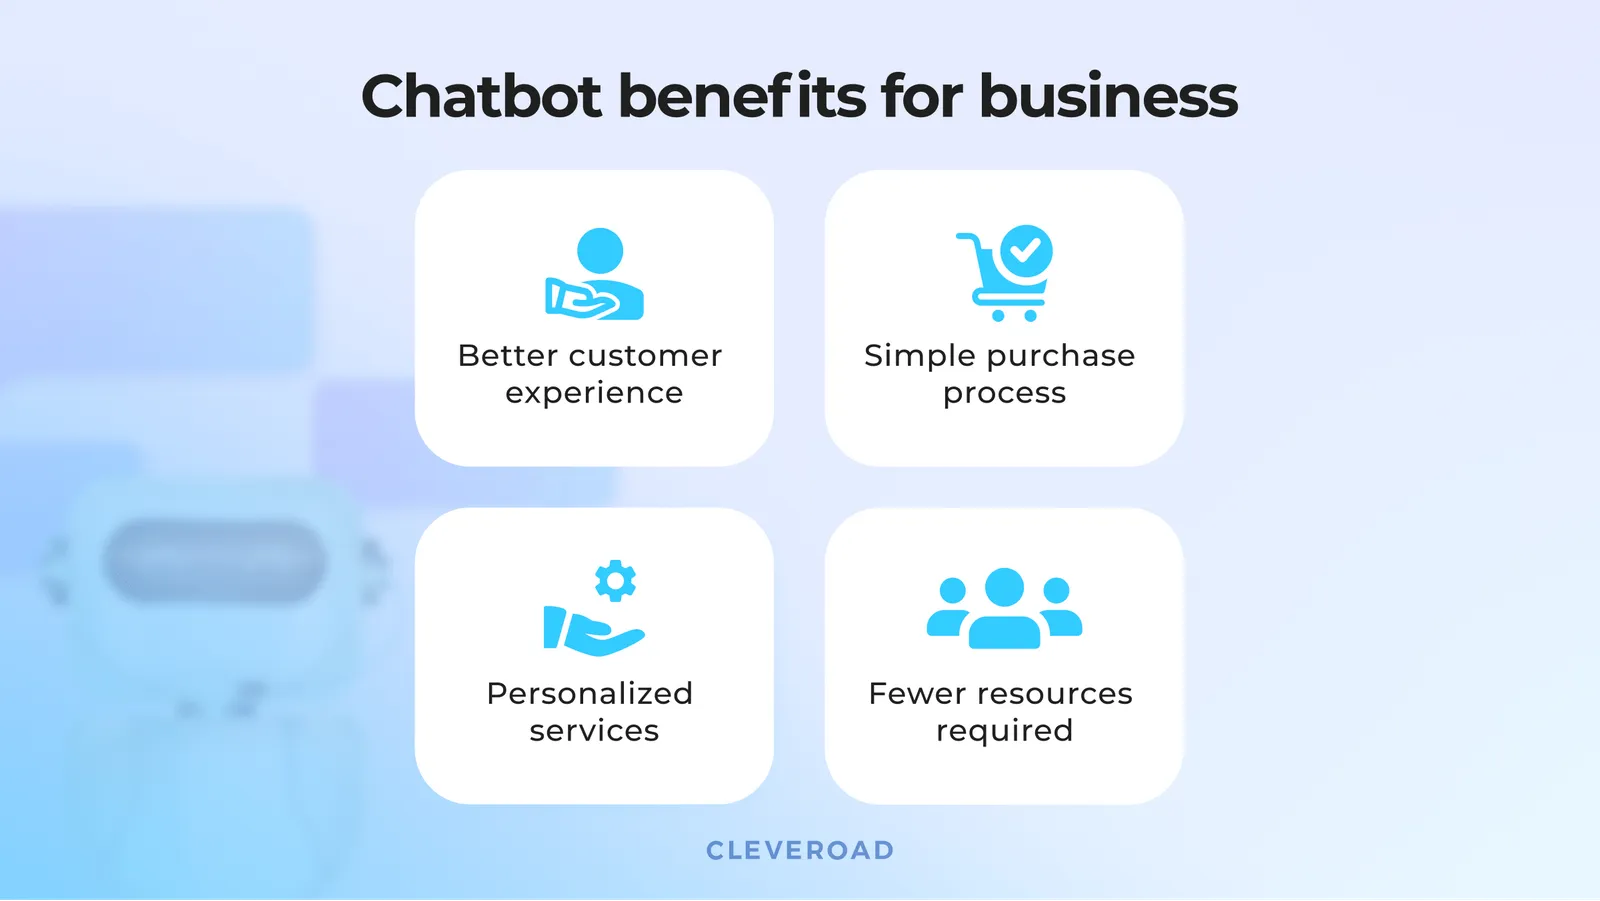 Chatbot benefits for business